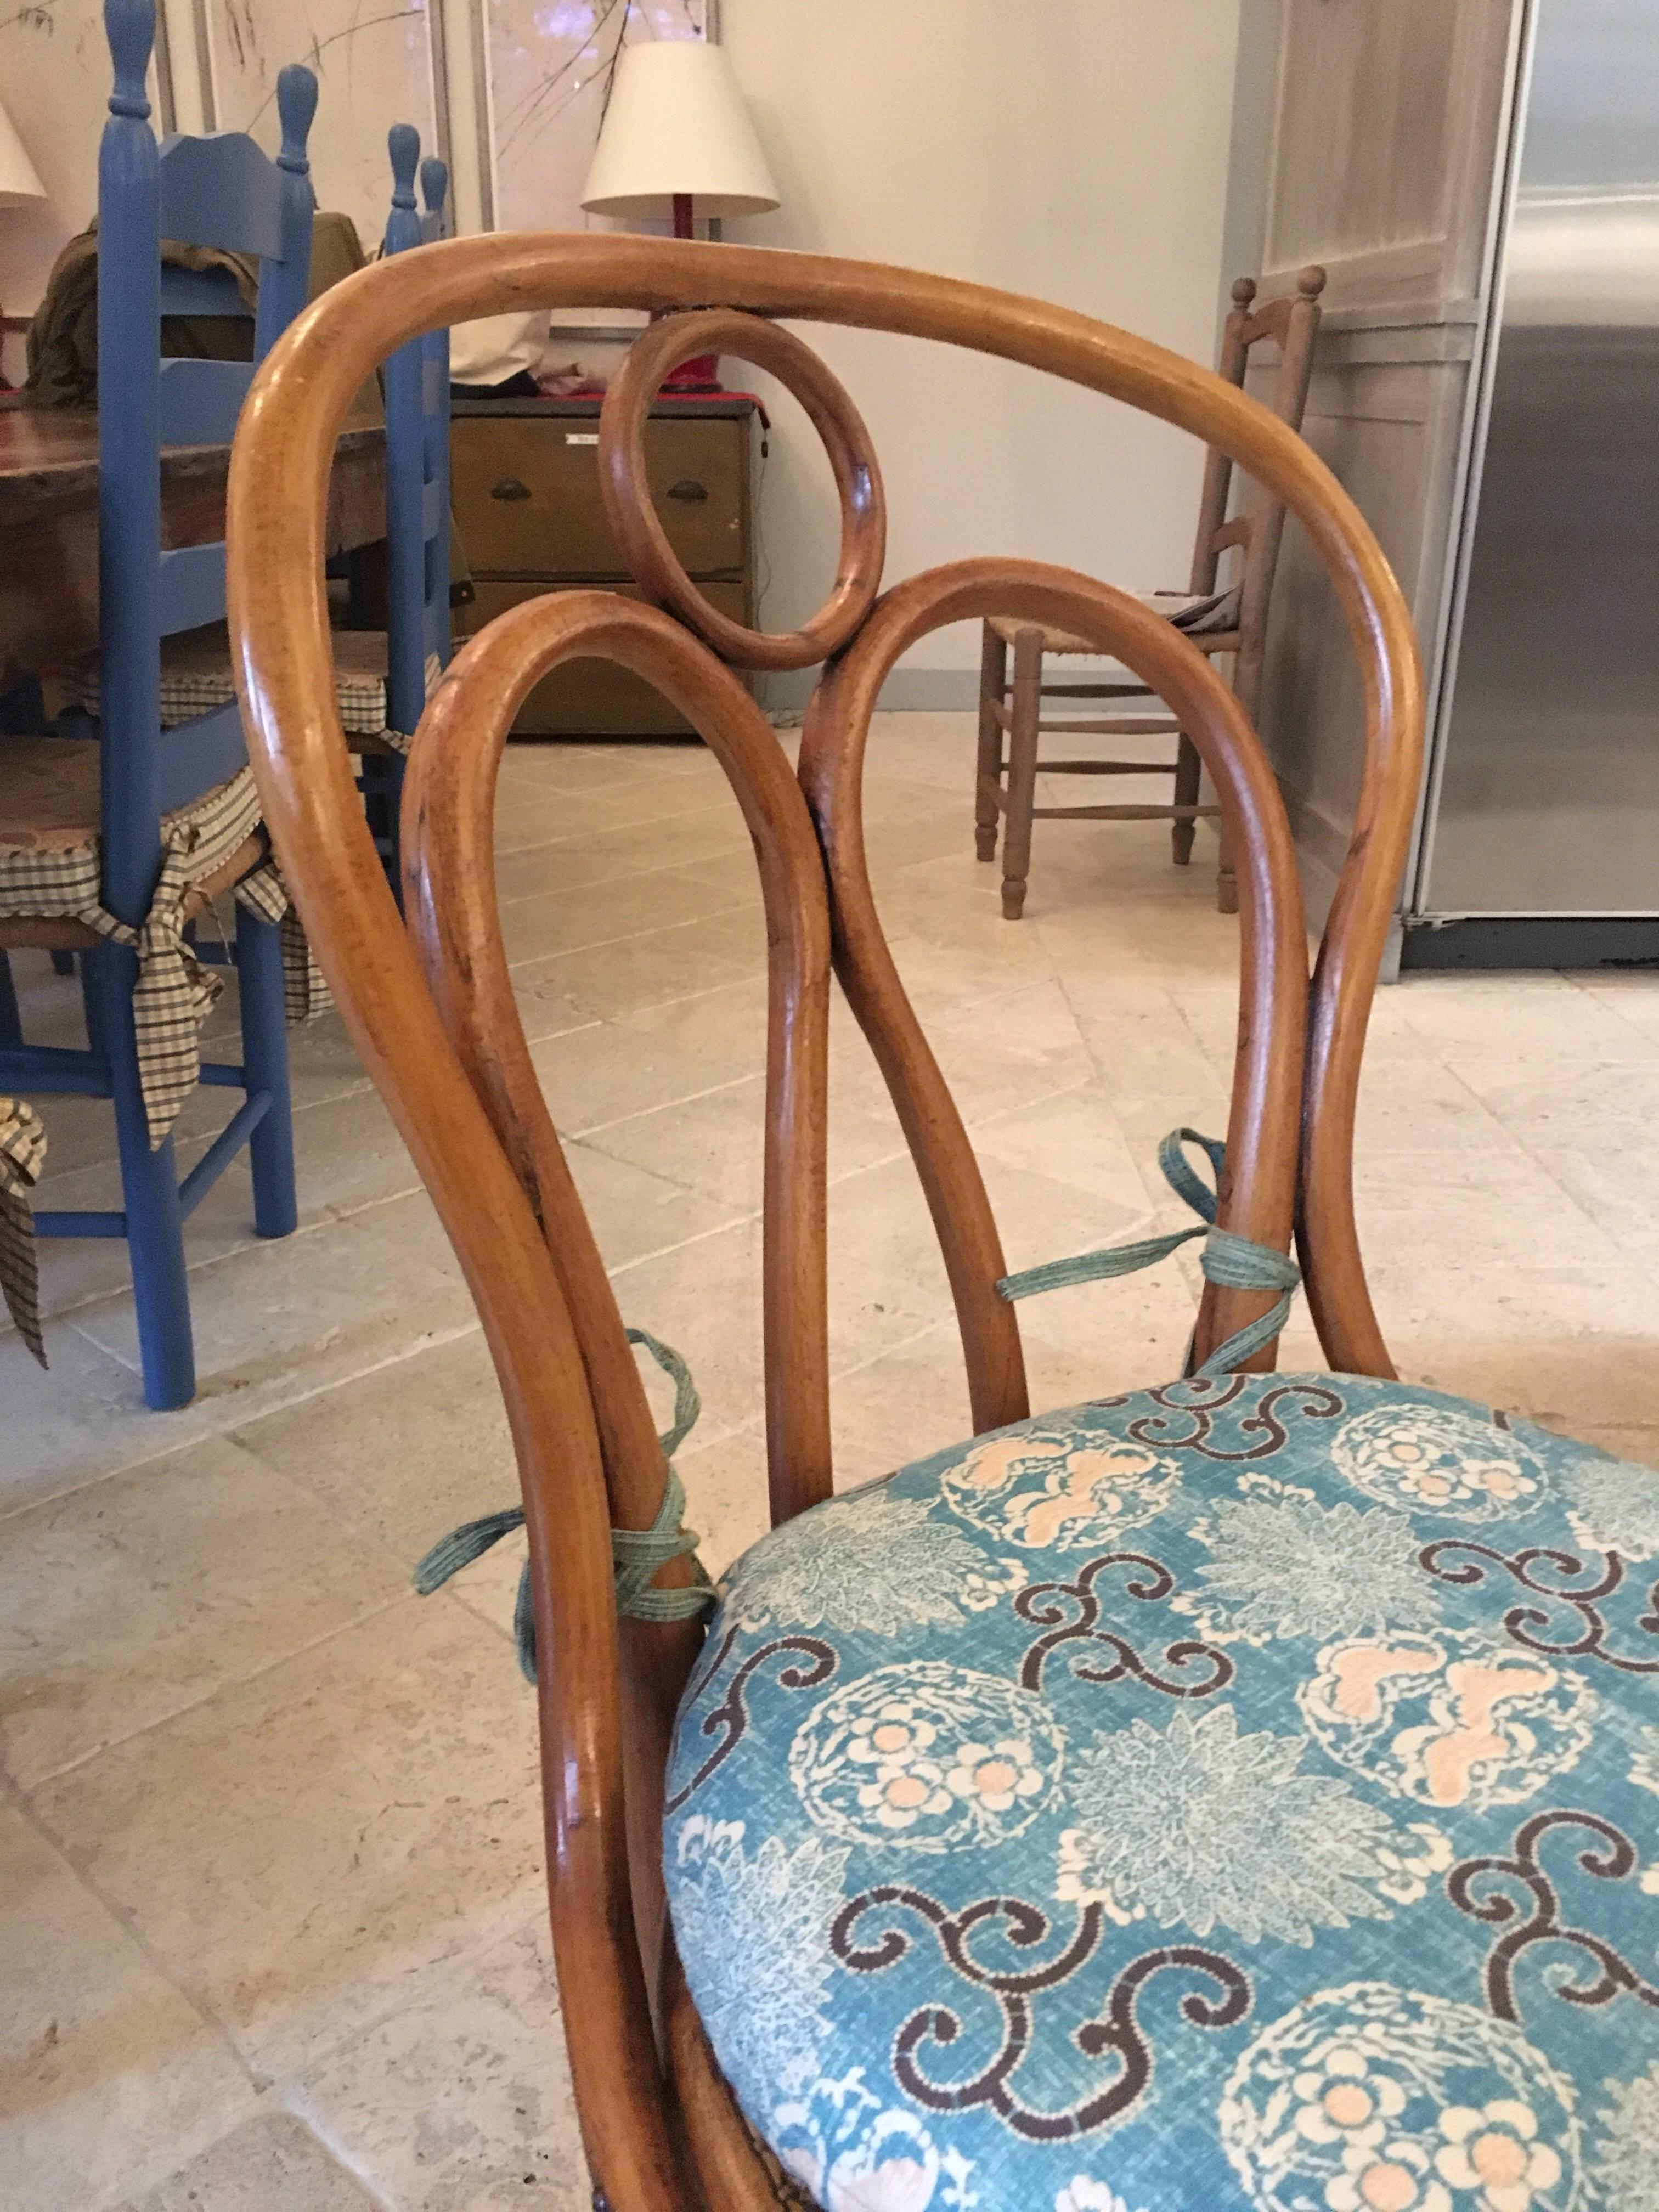 Set of seven mismatched Thonet style bentwood side chairs with custom-made cushions.
Three Viennese Chair J & J Kohn Nr.36 style chairs. (Circle motif at top)
Two no. 18 styles chair
Two Viennese Chair D.G.Fischel Nr.20 style chairs.

These